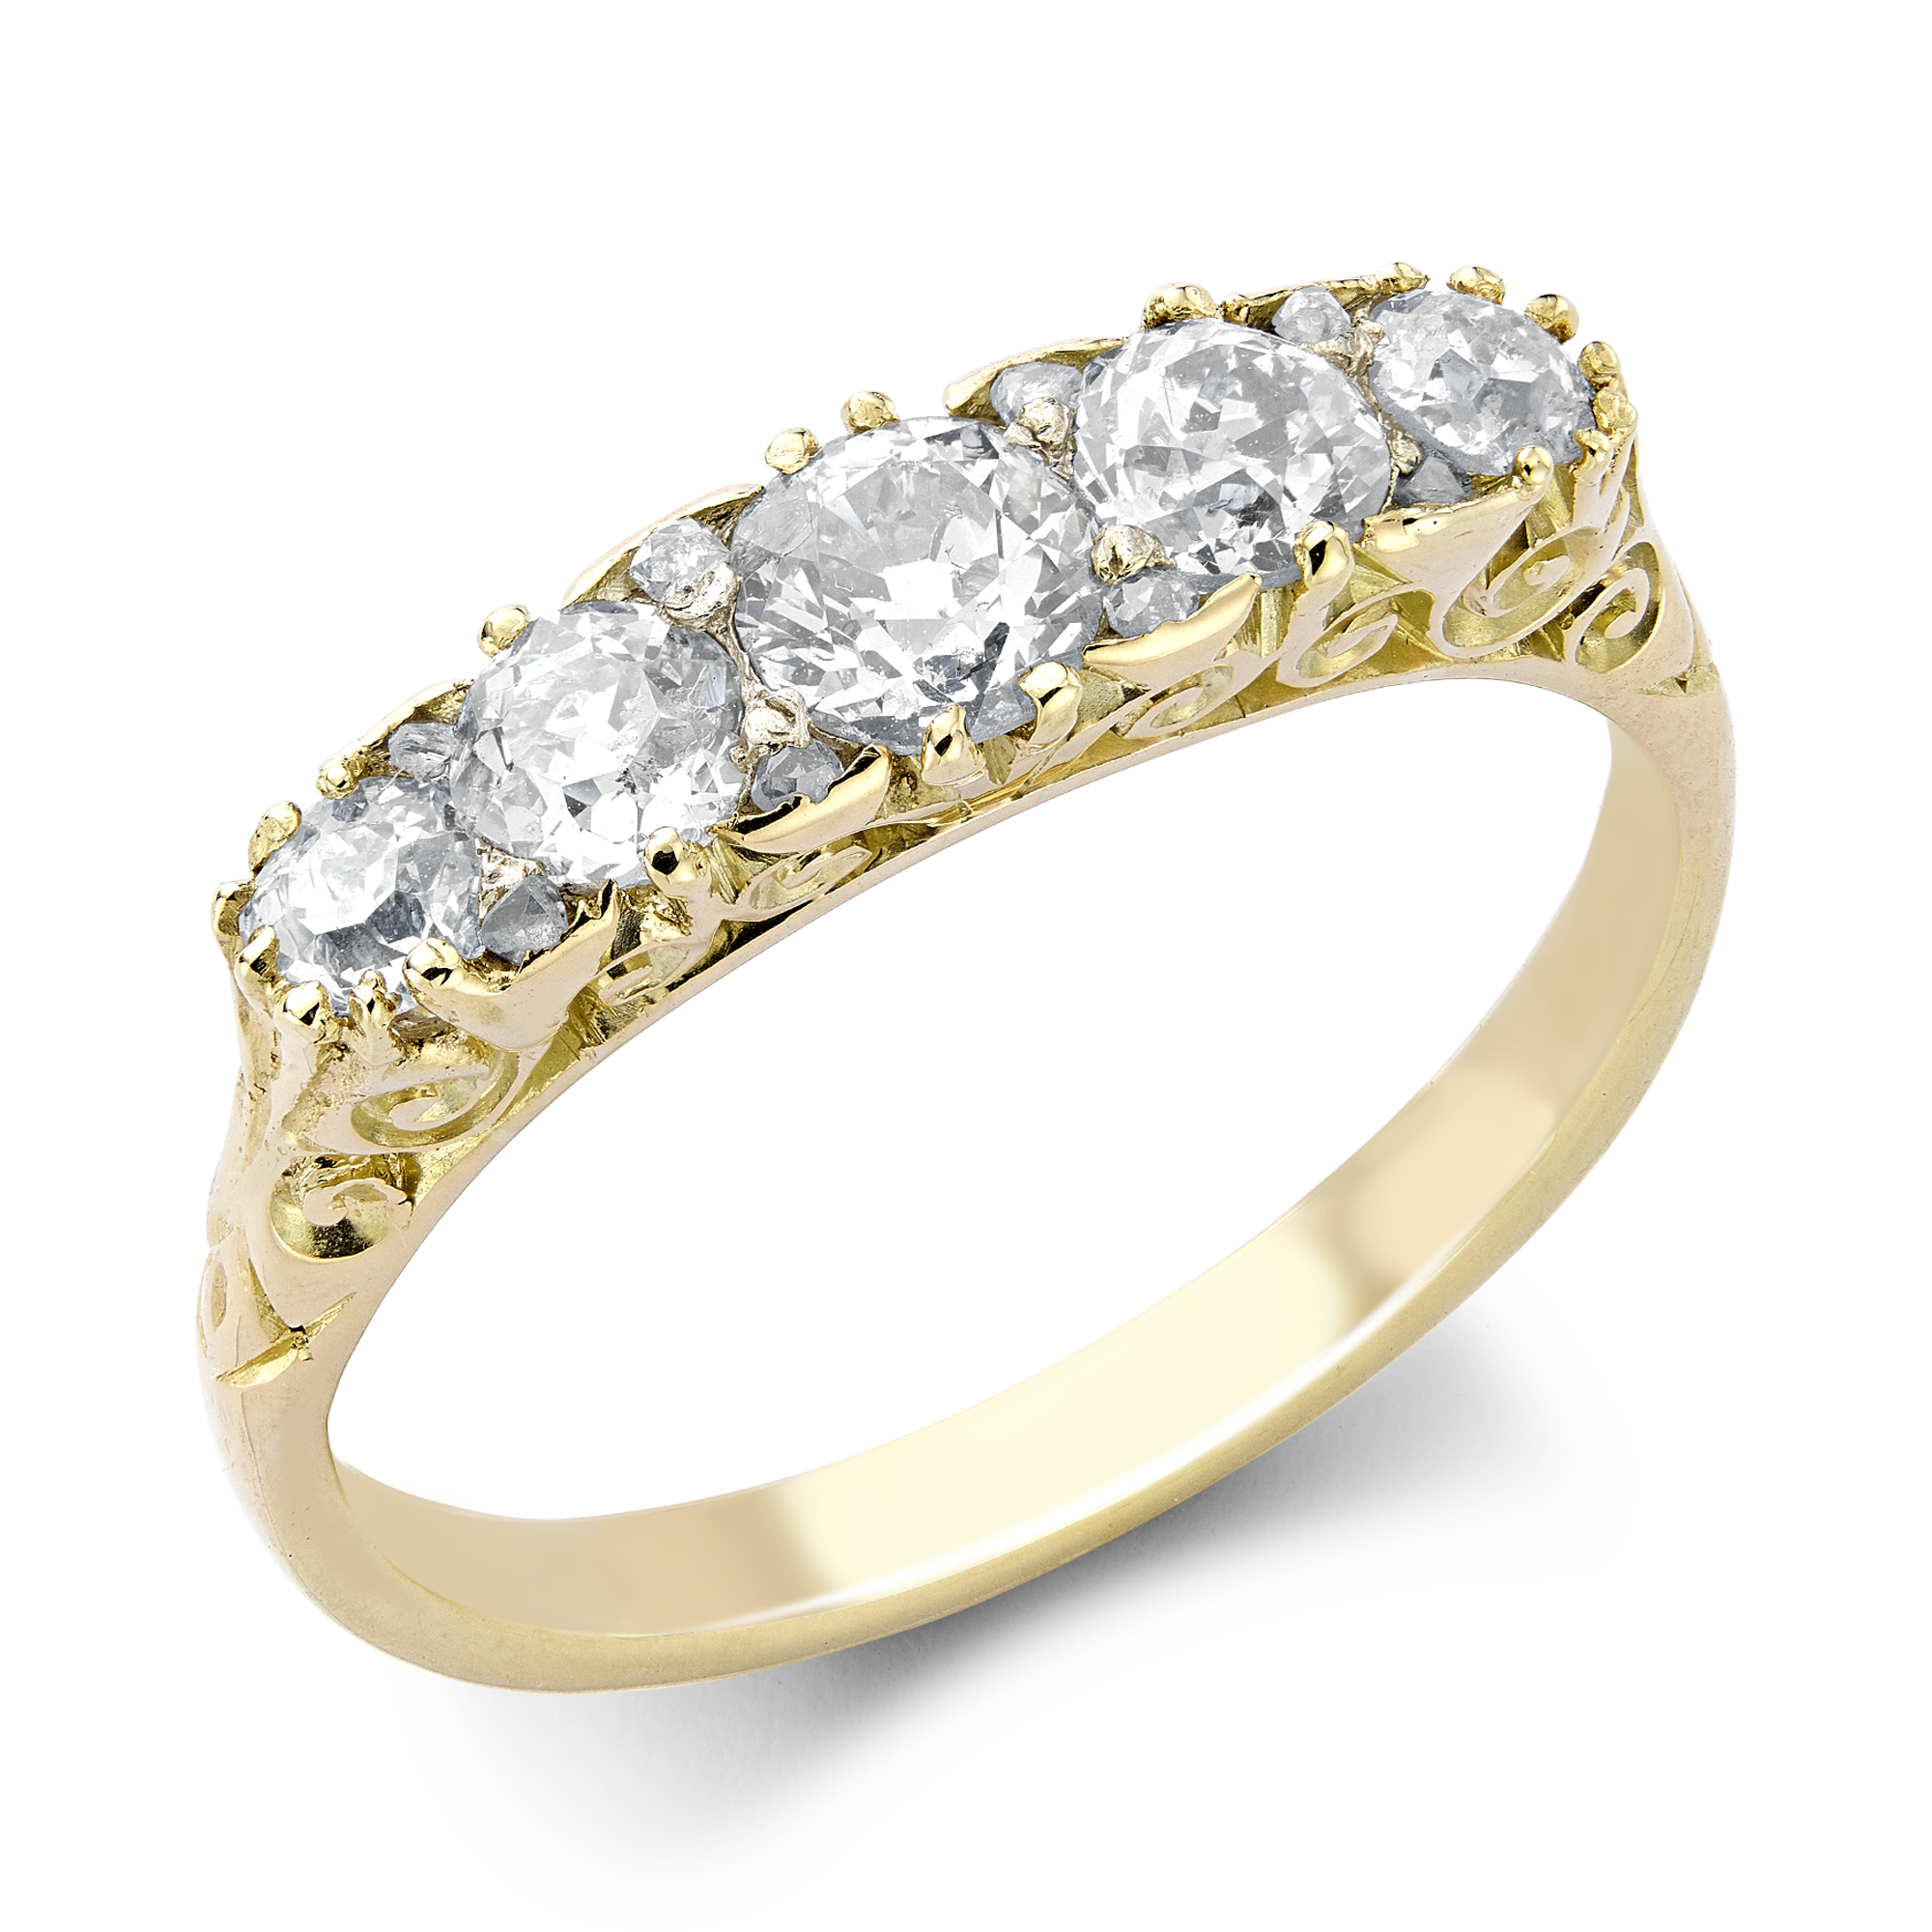 Eternity Rings: What are they and when are they given?